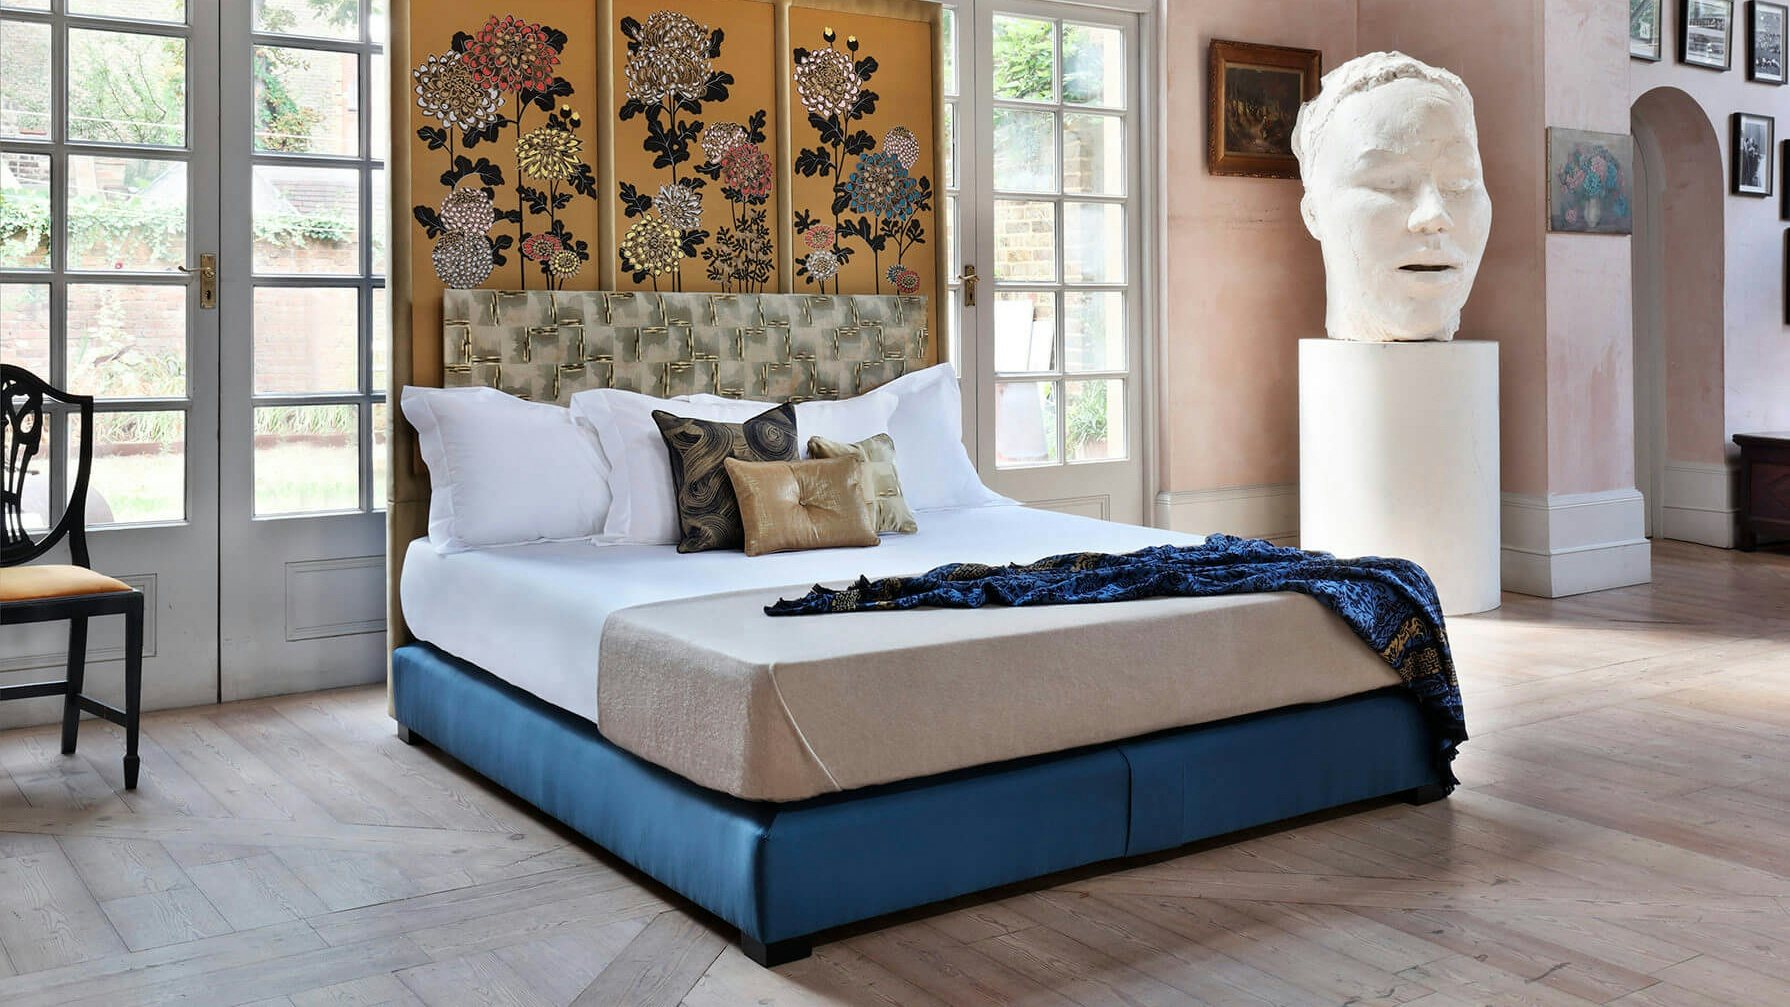 Rising awareness of the importance of rest is motivating consumers to make changes. The market potential here is too big for luxury brands to sleep on. Photo: Savoir Beds